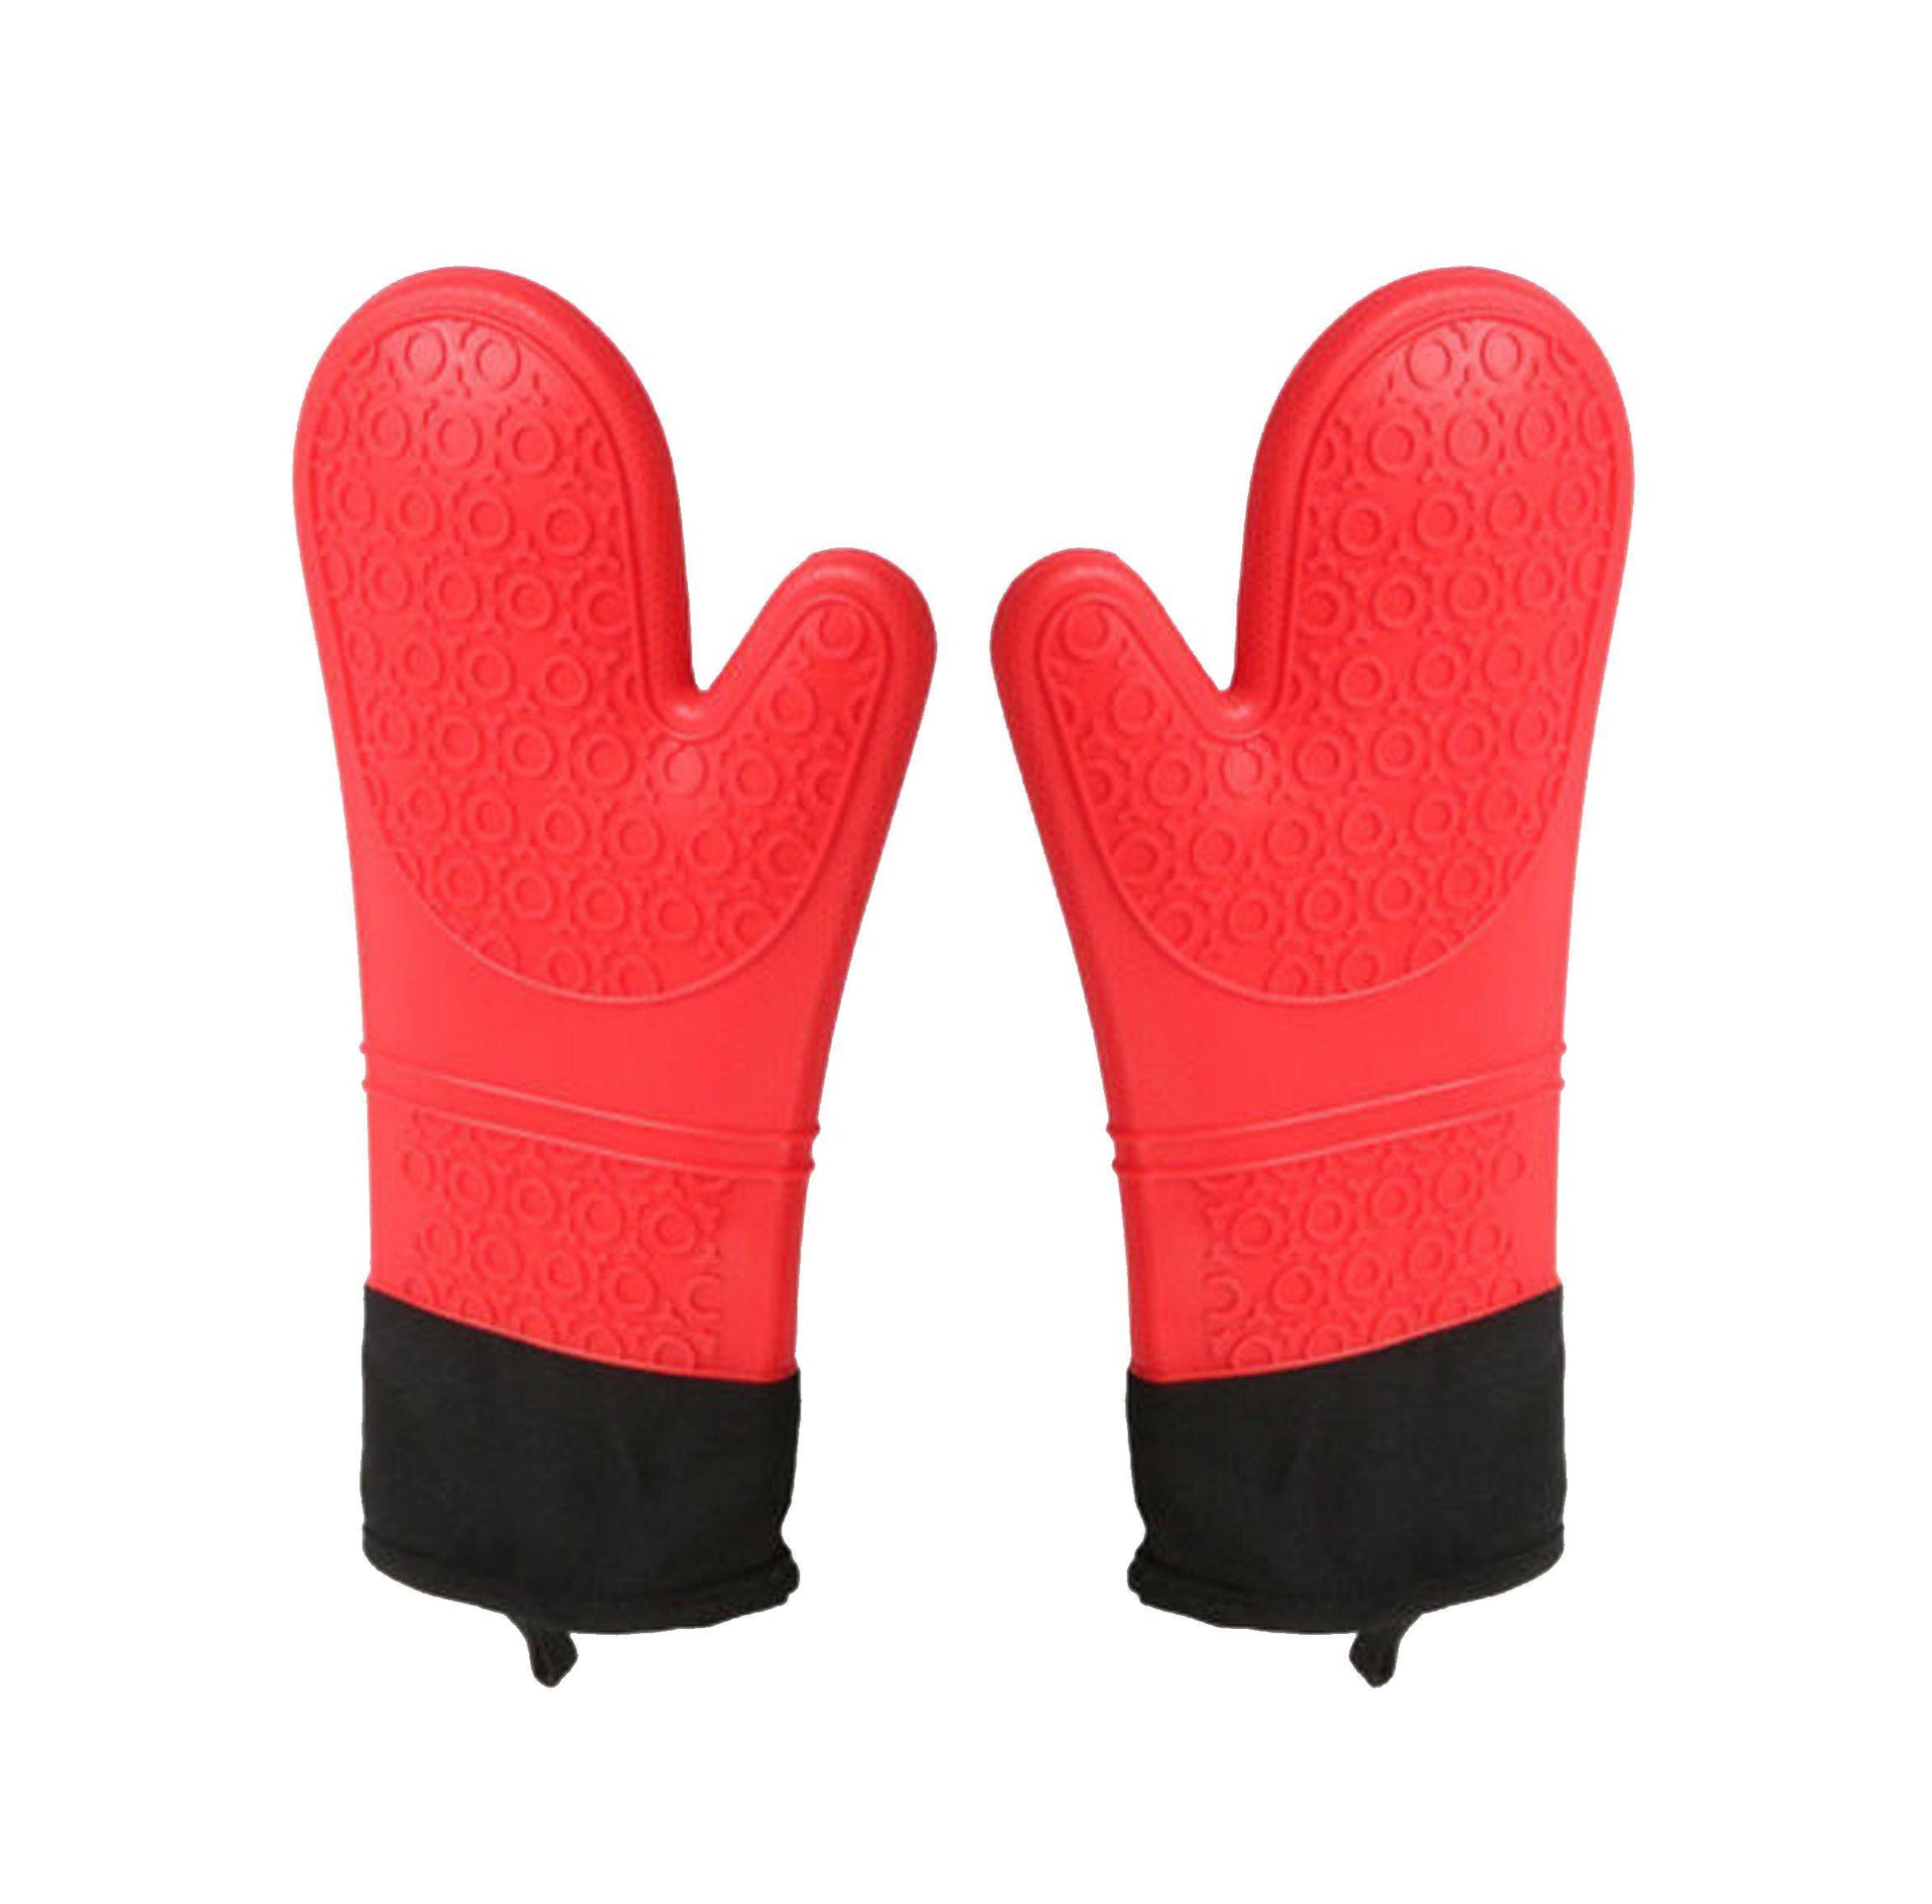 Stylish Heat Resistant Silicone Oven Mitts A-901-RED - Renoz